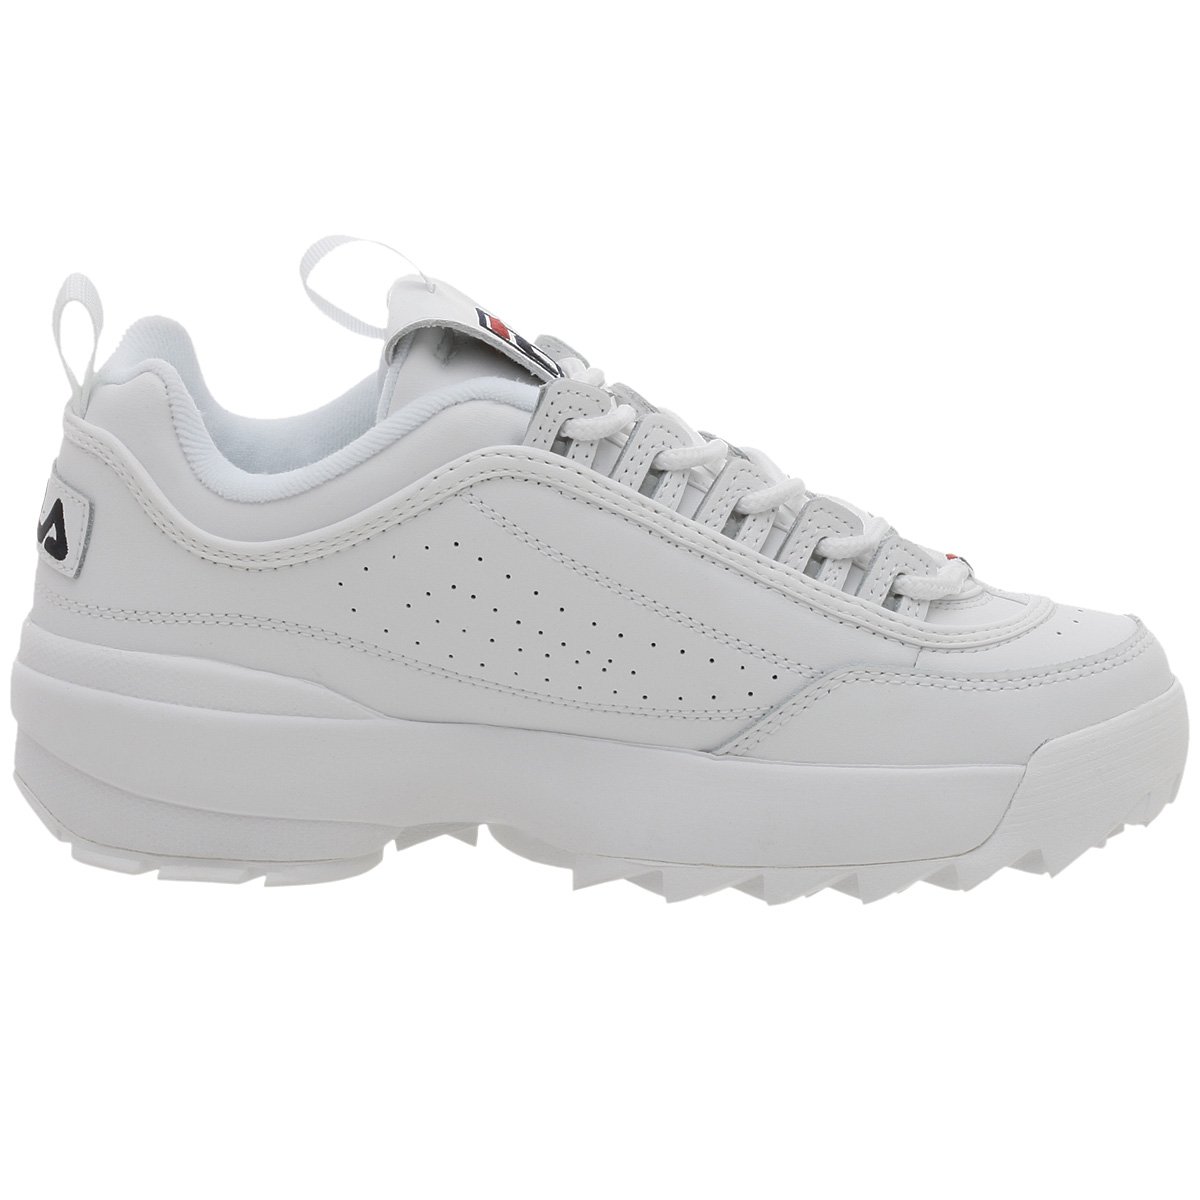 Fila Mens Disruptor ll Low Top Lace Up Fashion, White/Peacoat/Vinred ...